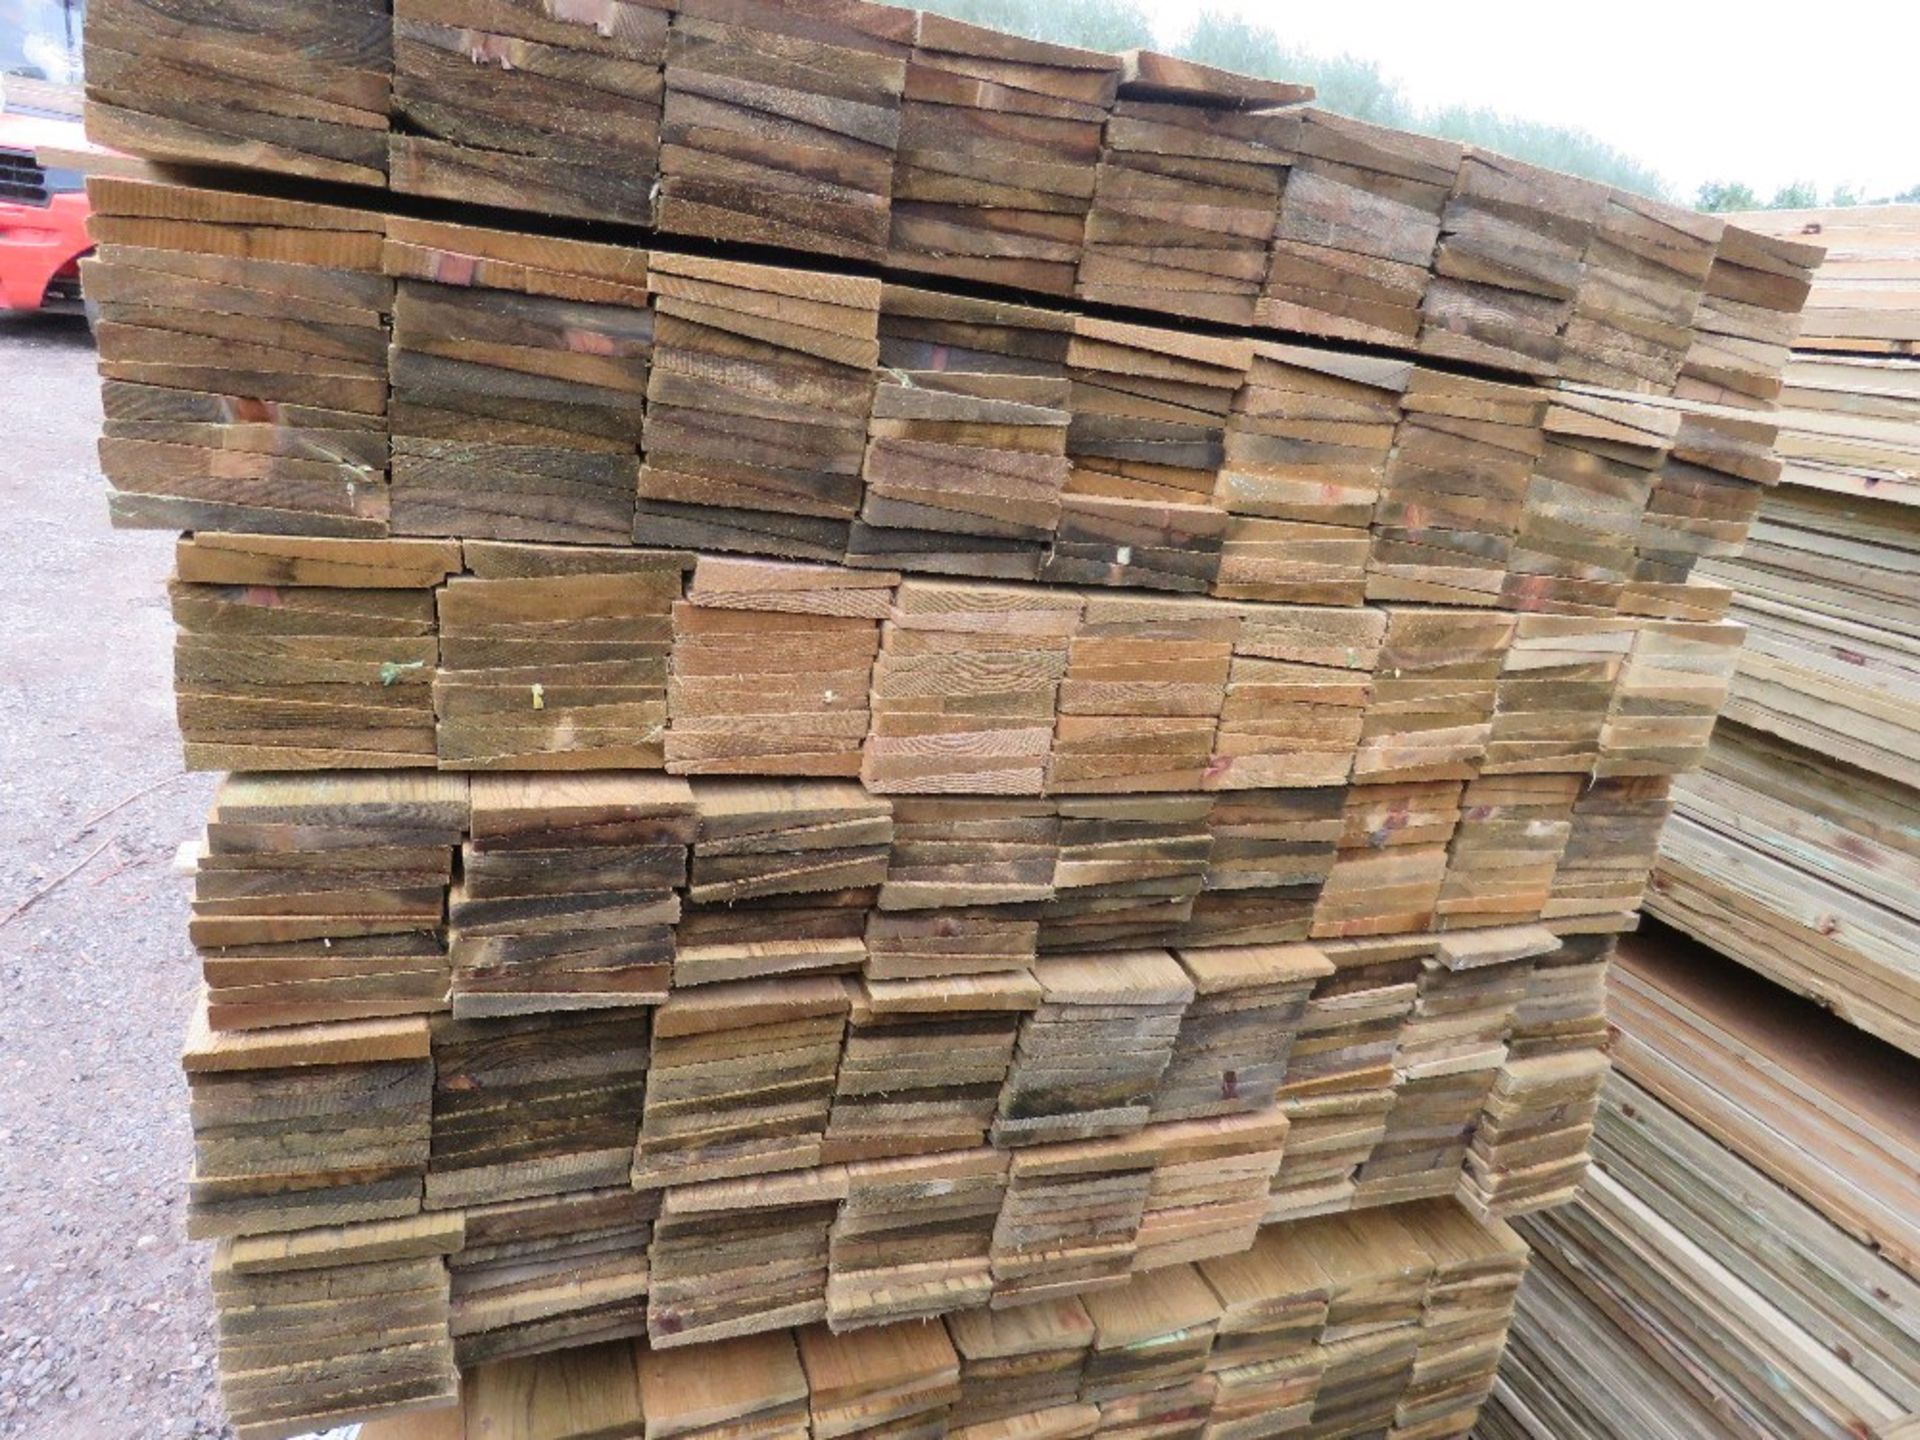 LARGE PACK OF TREATED FEATHER EDGE TIMBER CLADDING BOARDS, 1.2M LENGTH X 10CM WIDTH APPROX. - Image 3 of 4